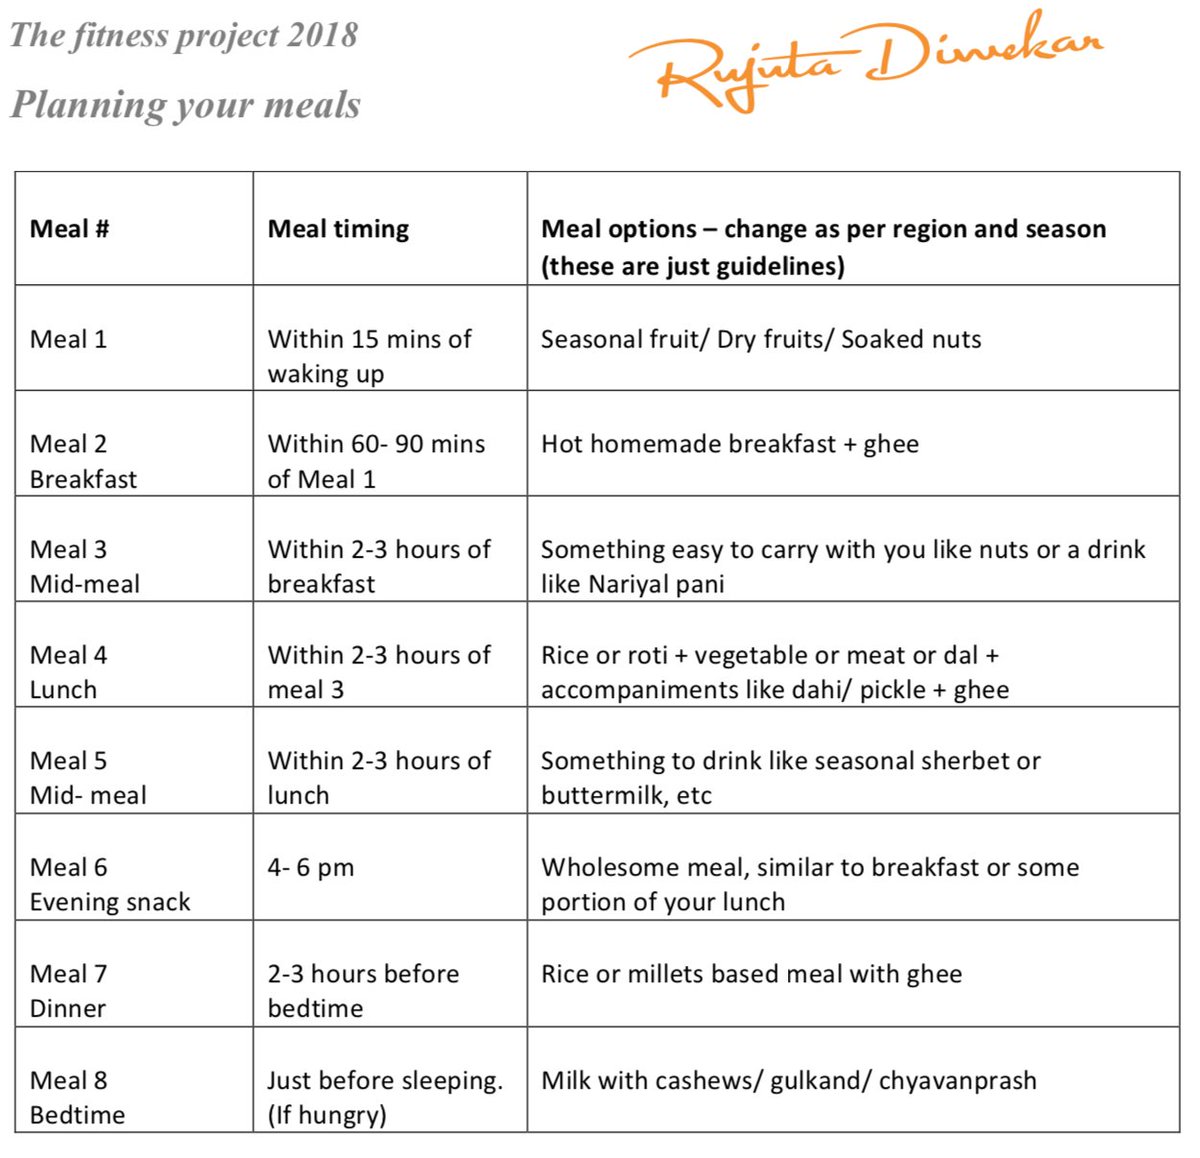 A rough guide to meal planning -Based on the guidelines from the 12-week fi...